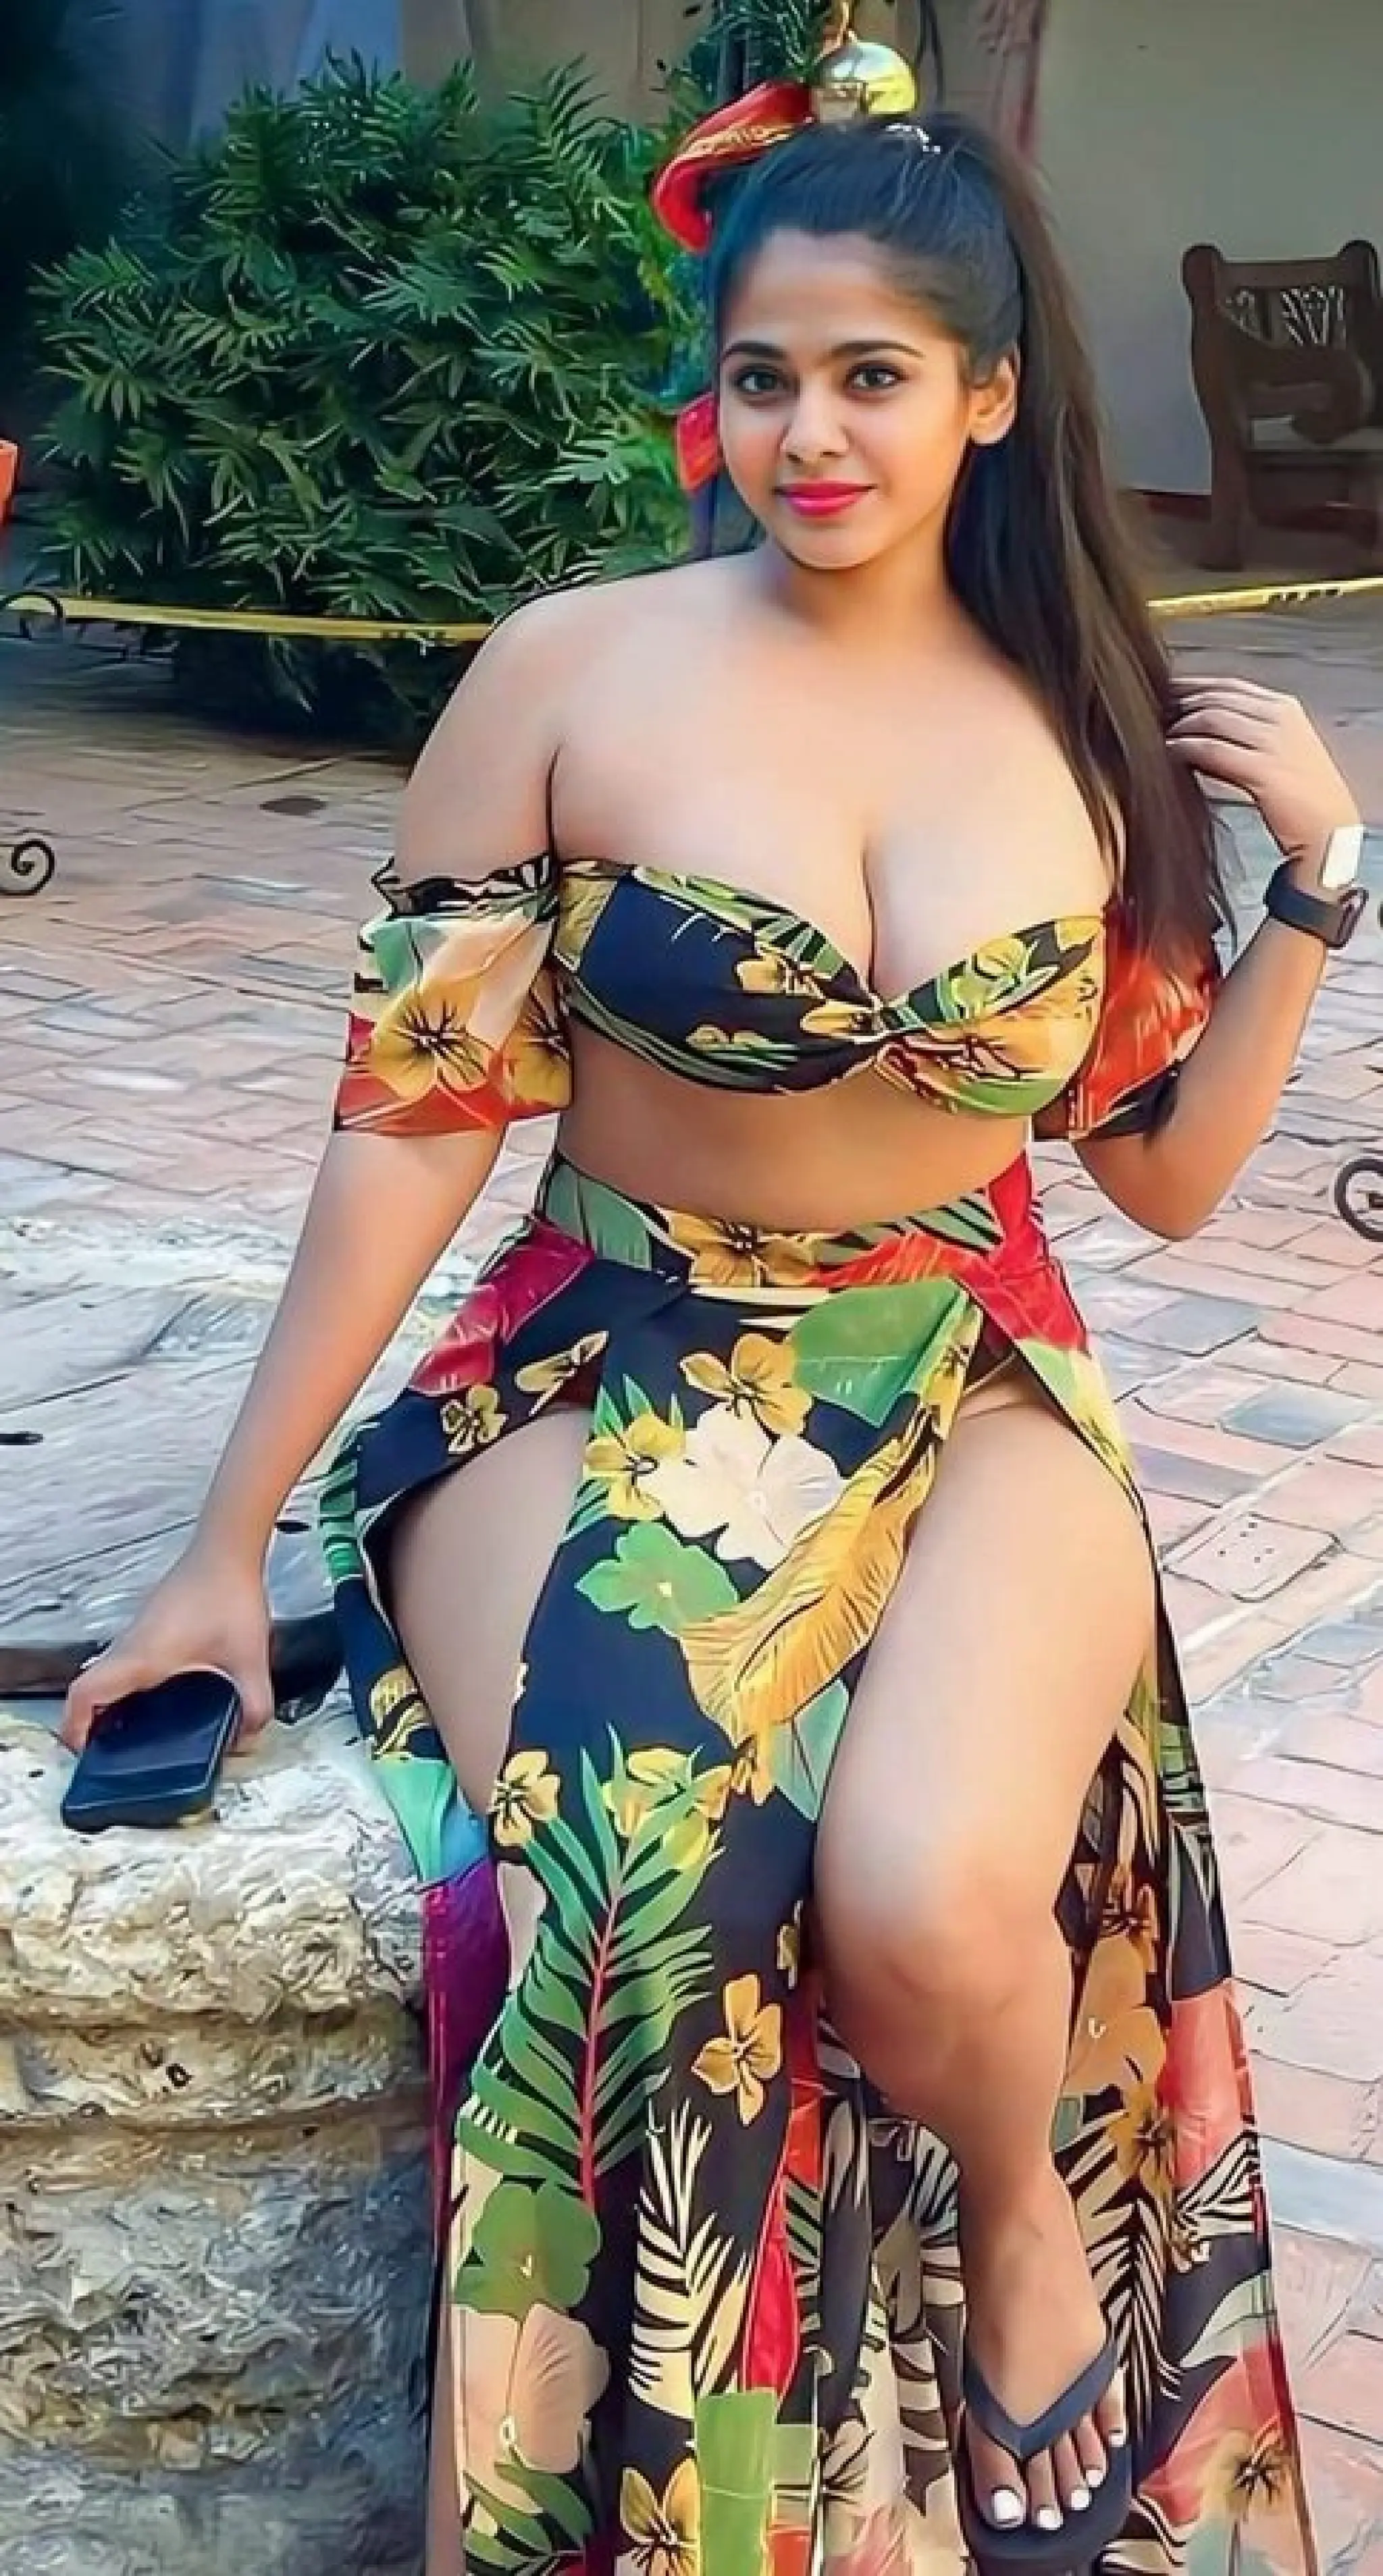 7838892339, Only Cash On Delivery Call Girls Service In Shalimar Bagh ,Shalimar Bagh Delhi,Others,Free Classifieds,Post Free Ads,77traders.com